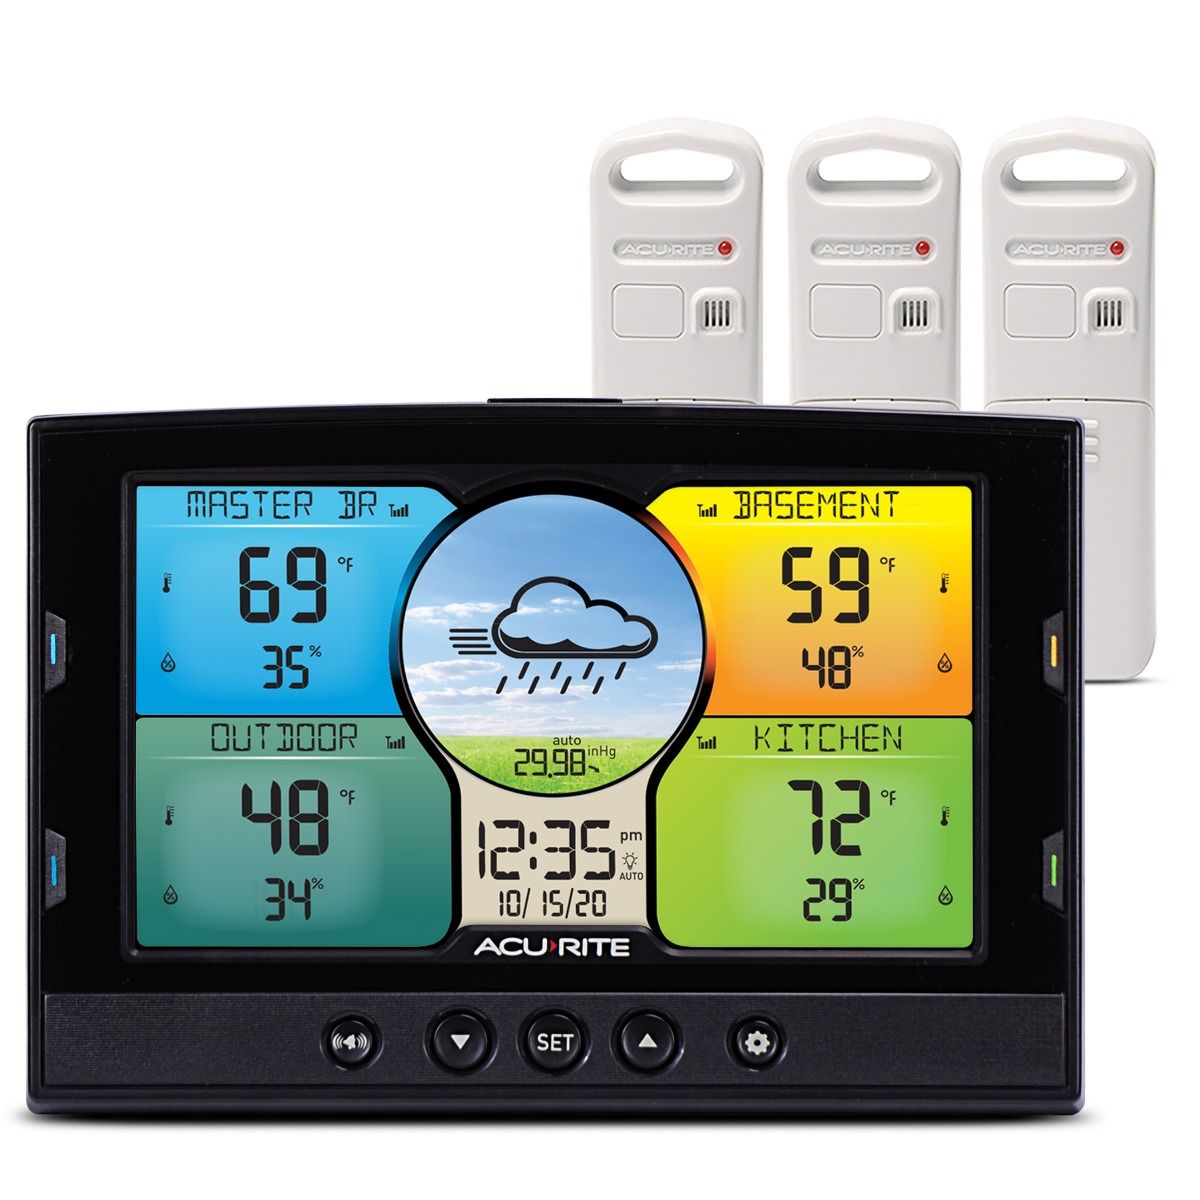 Hd Weather Station Multi-function Lcd Display Indoor Outdoor Thermometer  Hygrometer With Remote Sensors